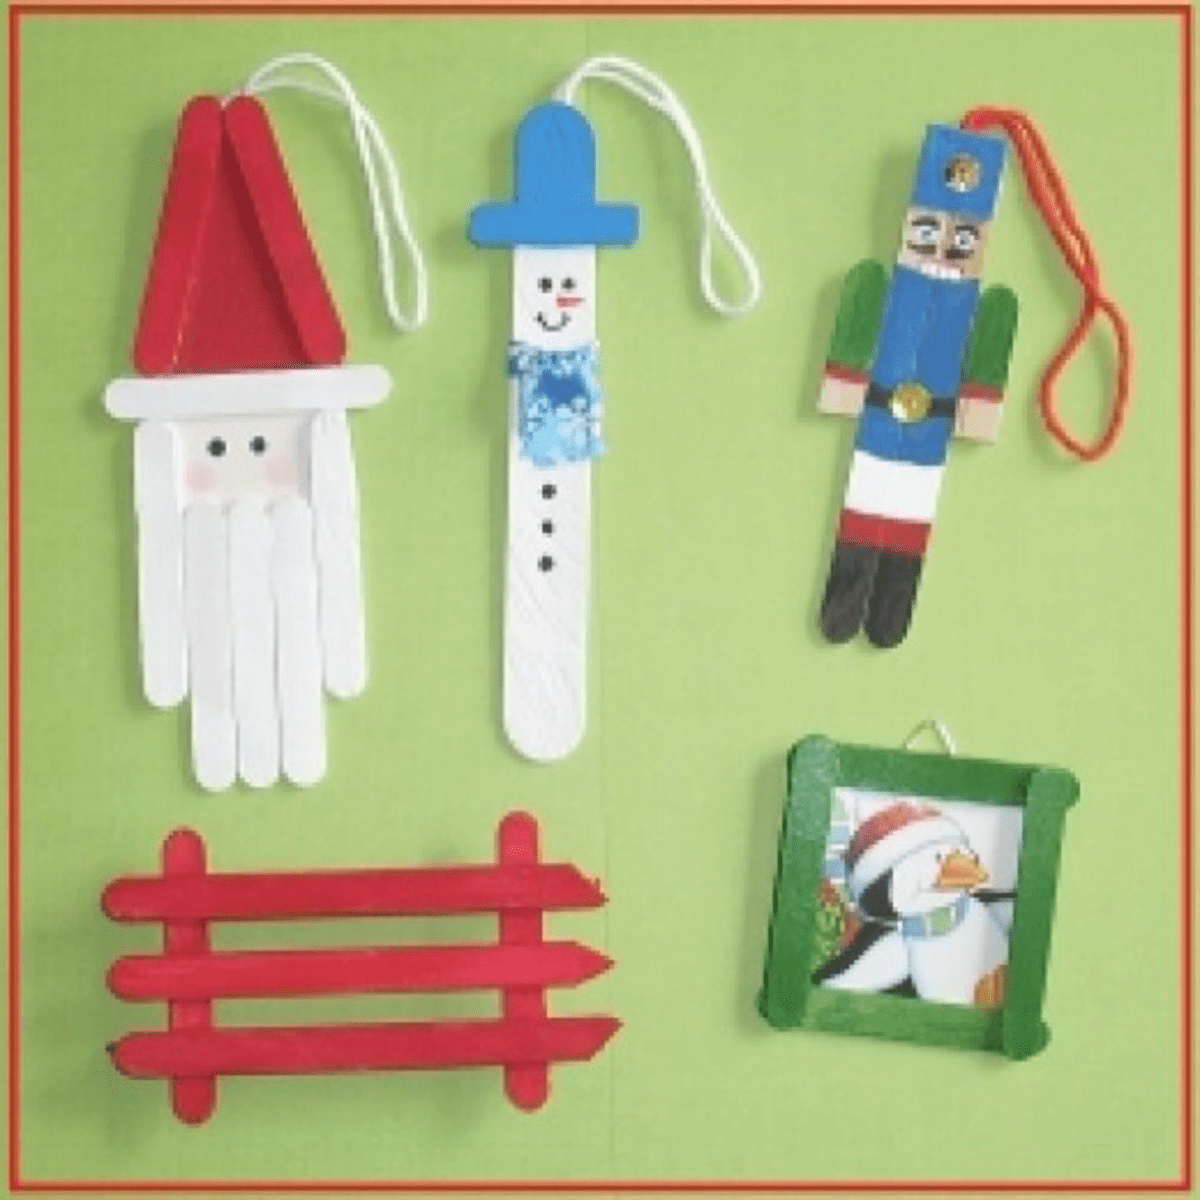 16 Easy Popsicle Stick Christmas Crafts - Popsicle Ornaments